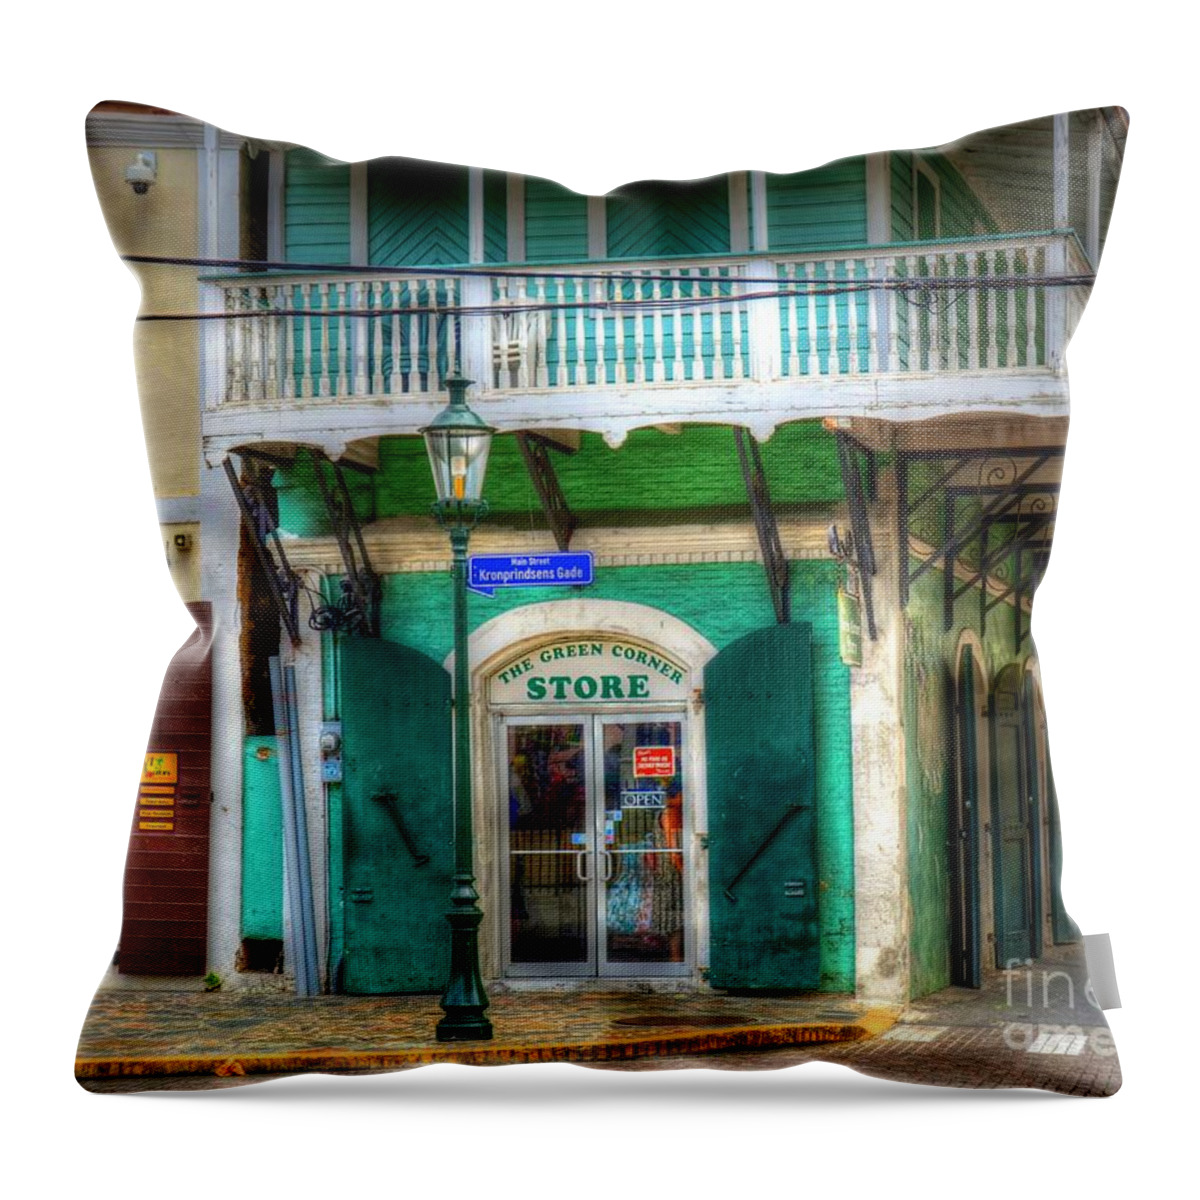 Store Throw Pillow featuring the photograph Green Corner Store by Debbi Granruth